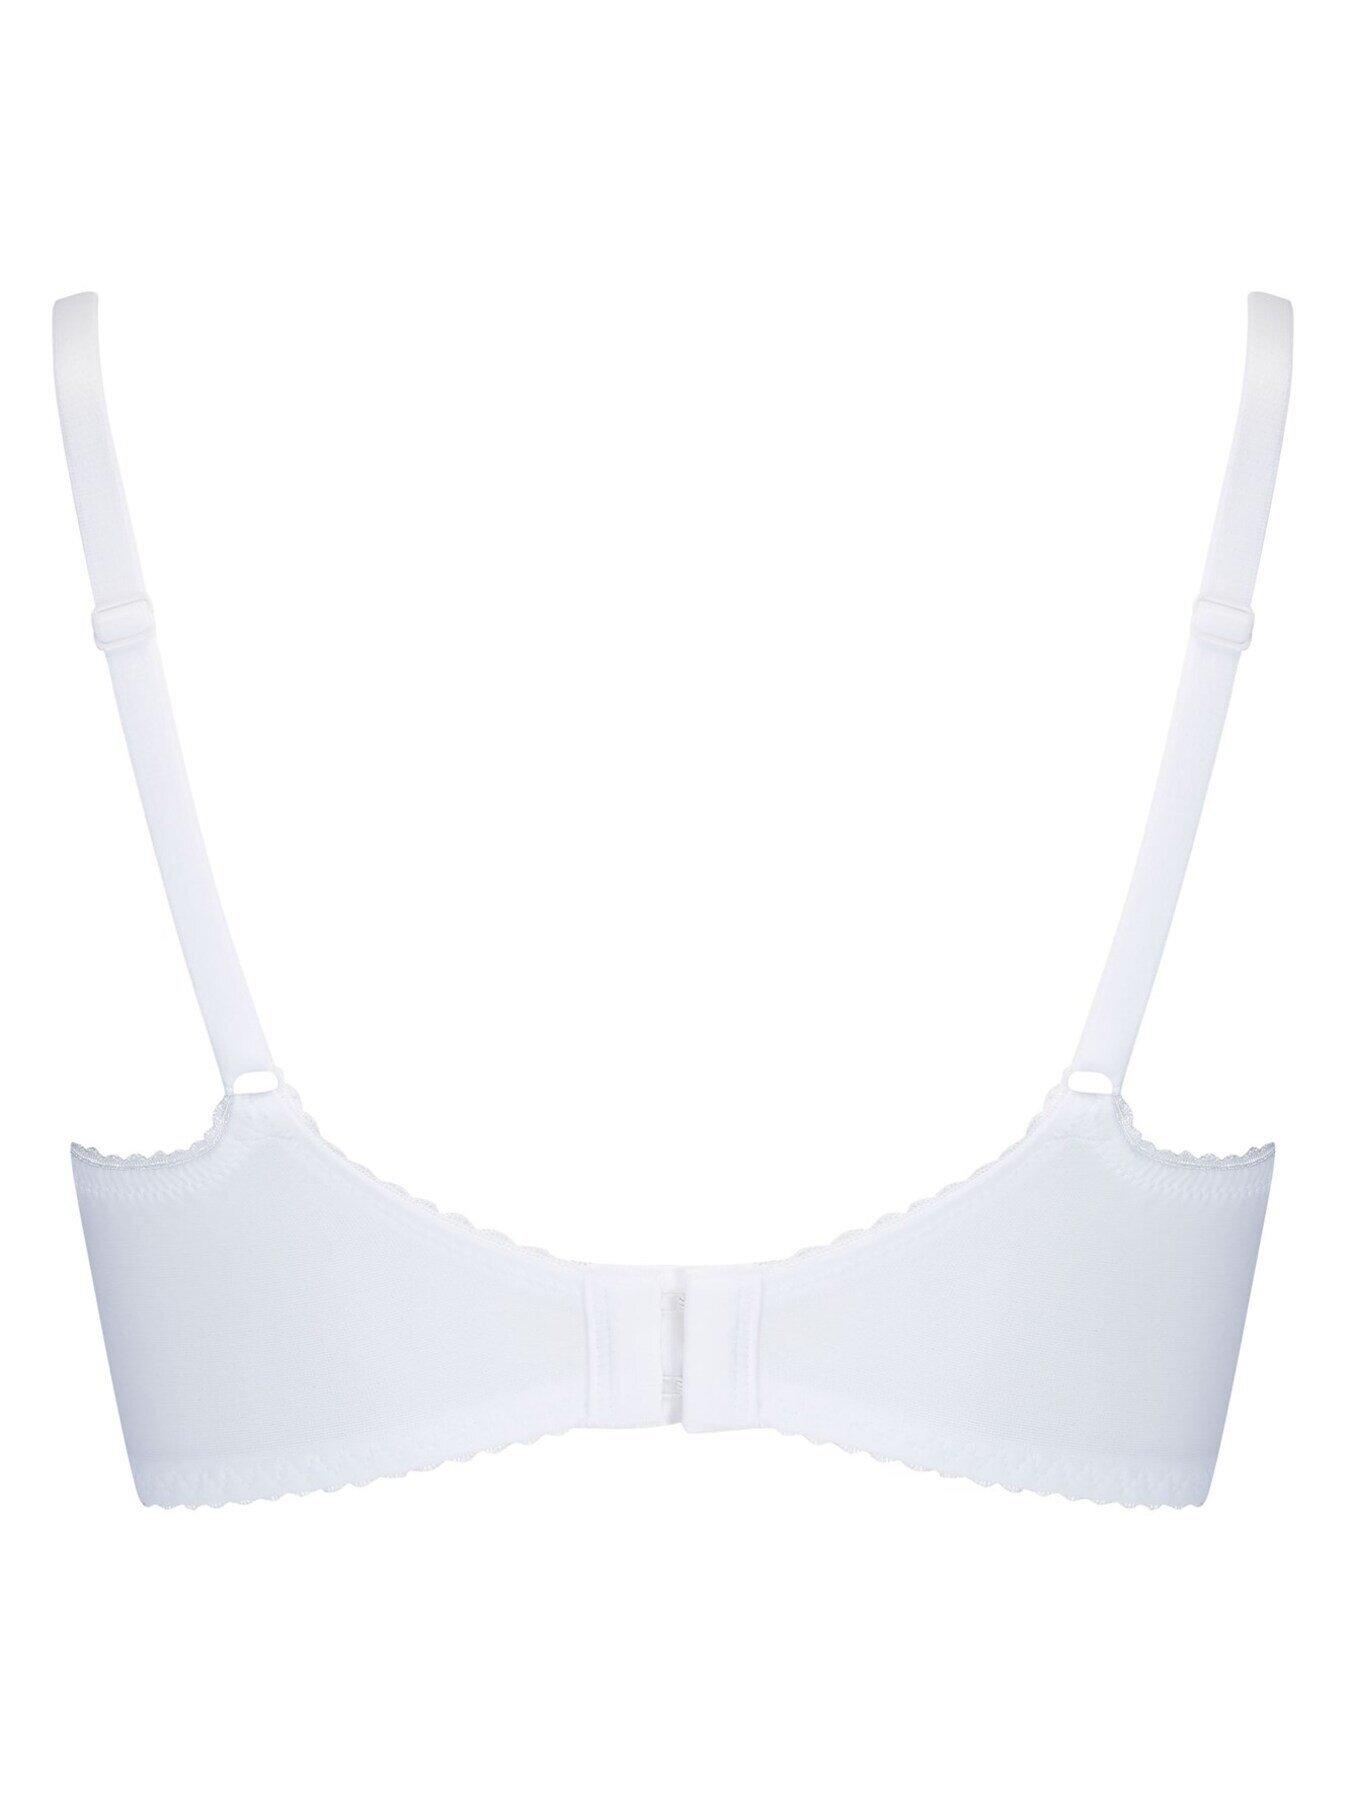 Pour Moi Rosalind Full Cup Underwired Bra White Uk 